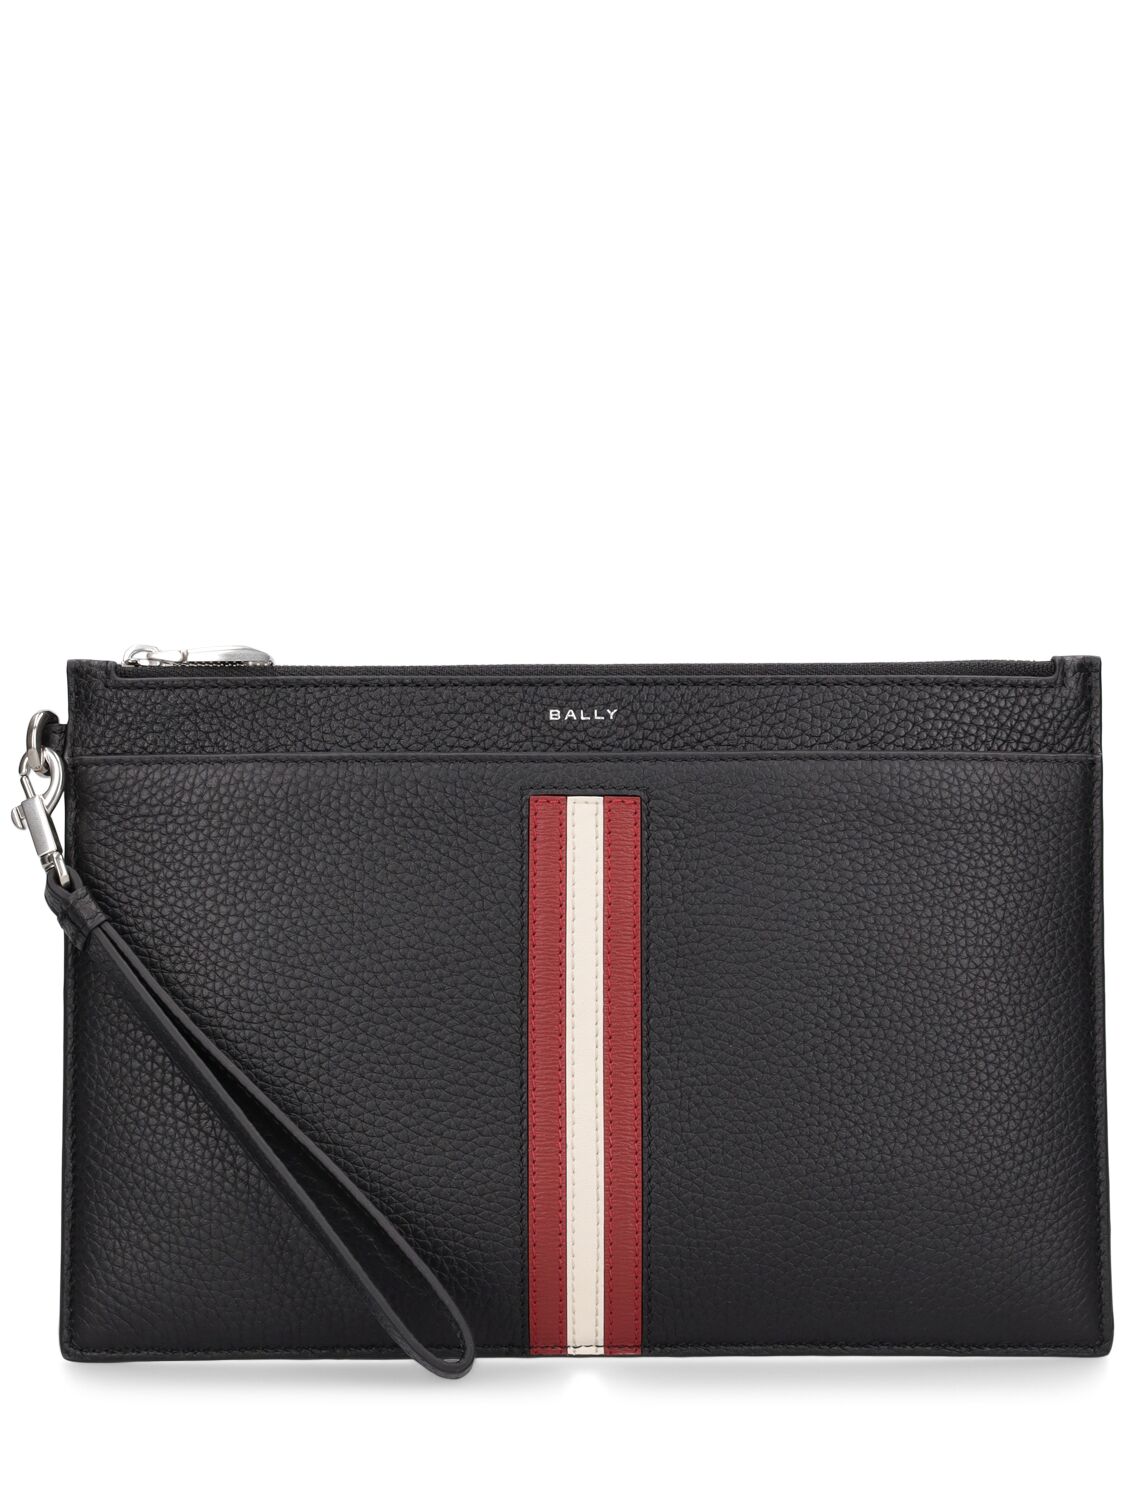 Bally Ribbon Leather Zip Pouch In Black,red